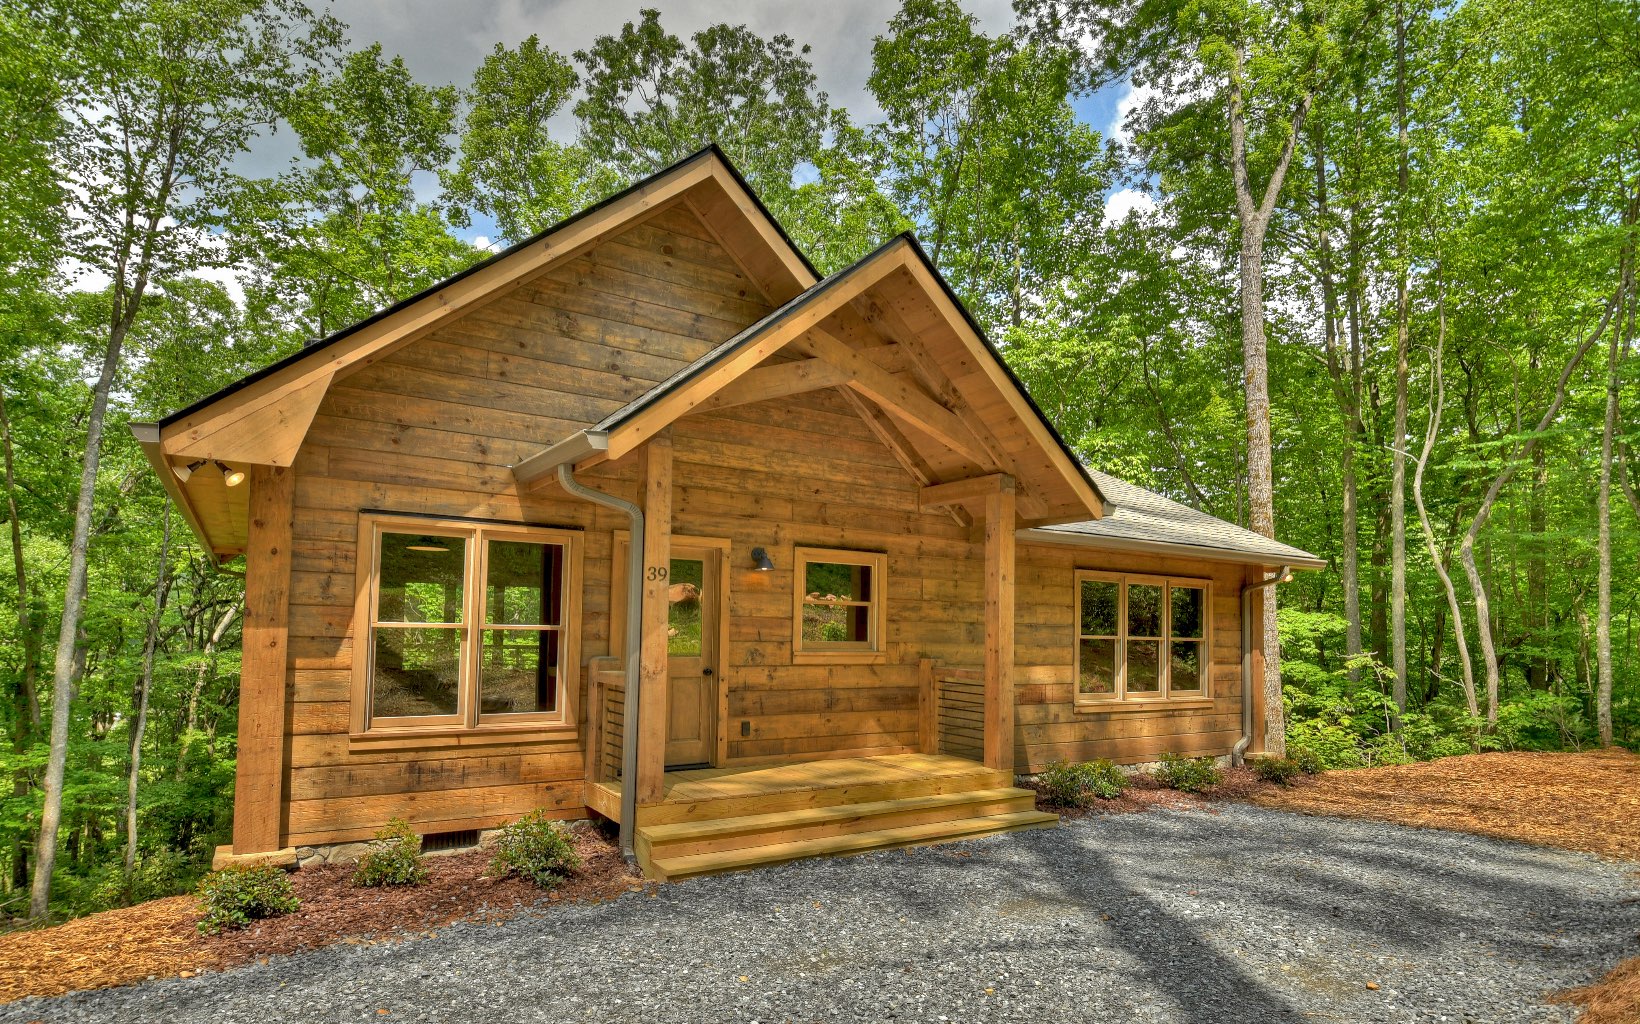 Don't miss this stunning log cabin sitting on a pristine creek. Greatroom/kitchen with wood beams, 2 spacious bedrooms, 2 full baths & wood floors throughout. You'll love the beamed, covered porch where you can listen to the rapids of the creek. Mountain bikers dream!